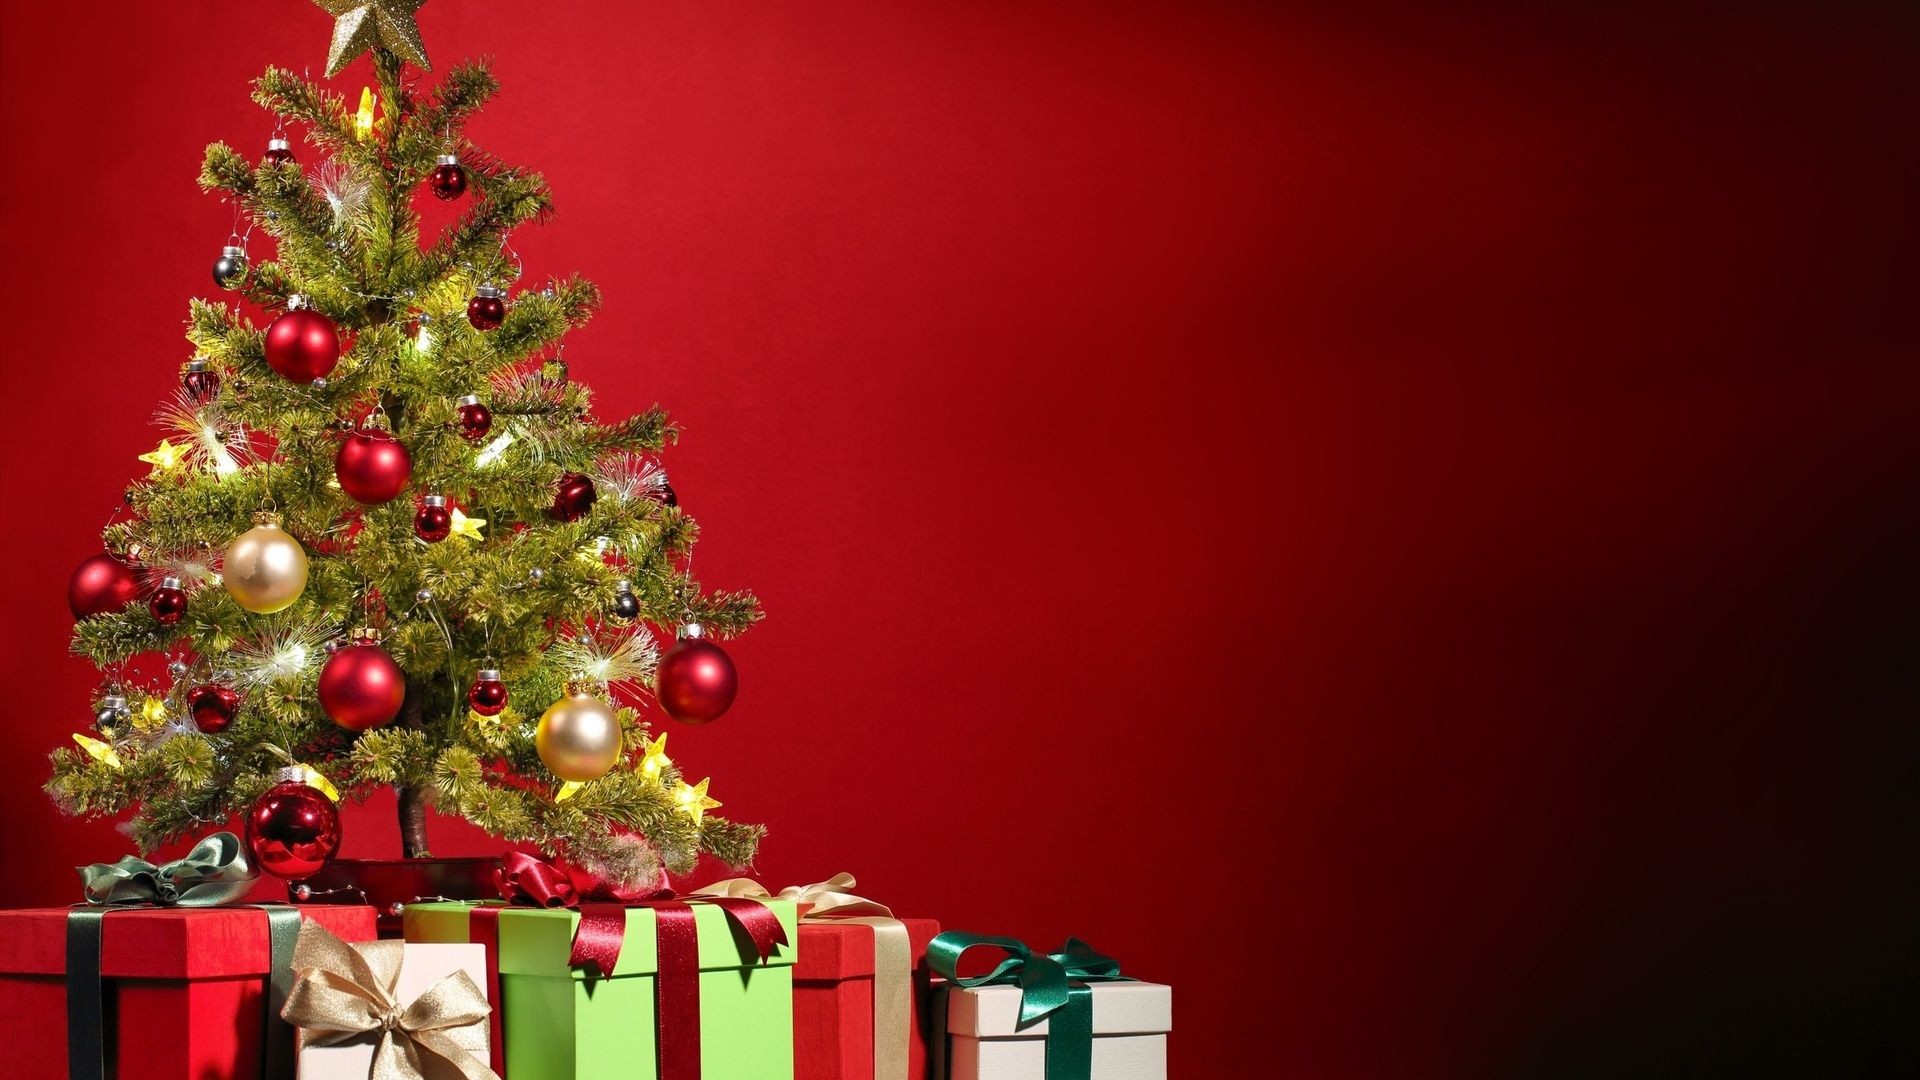 1920x1080 Principle Present: Dominance The christmas tree shows dominance in this  picture as when seen with this red back drop, the viewers eye is  instinctively drawn ...